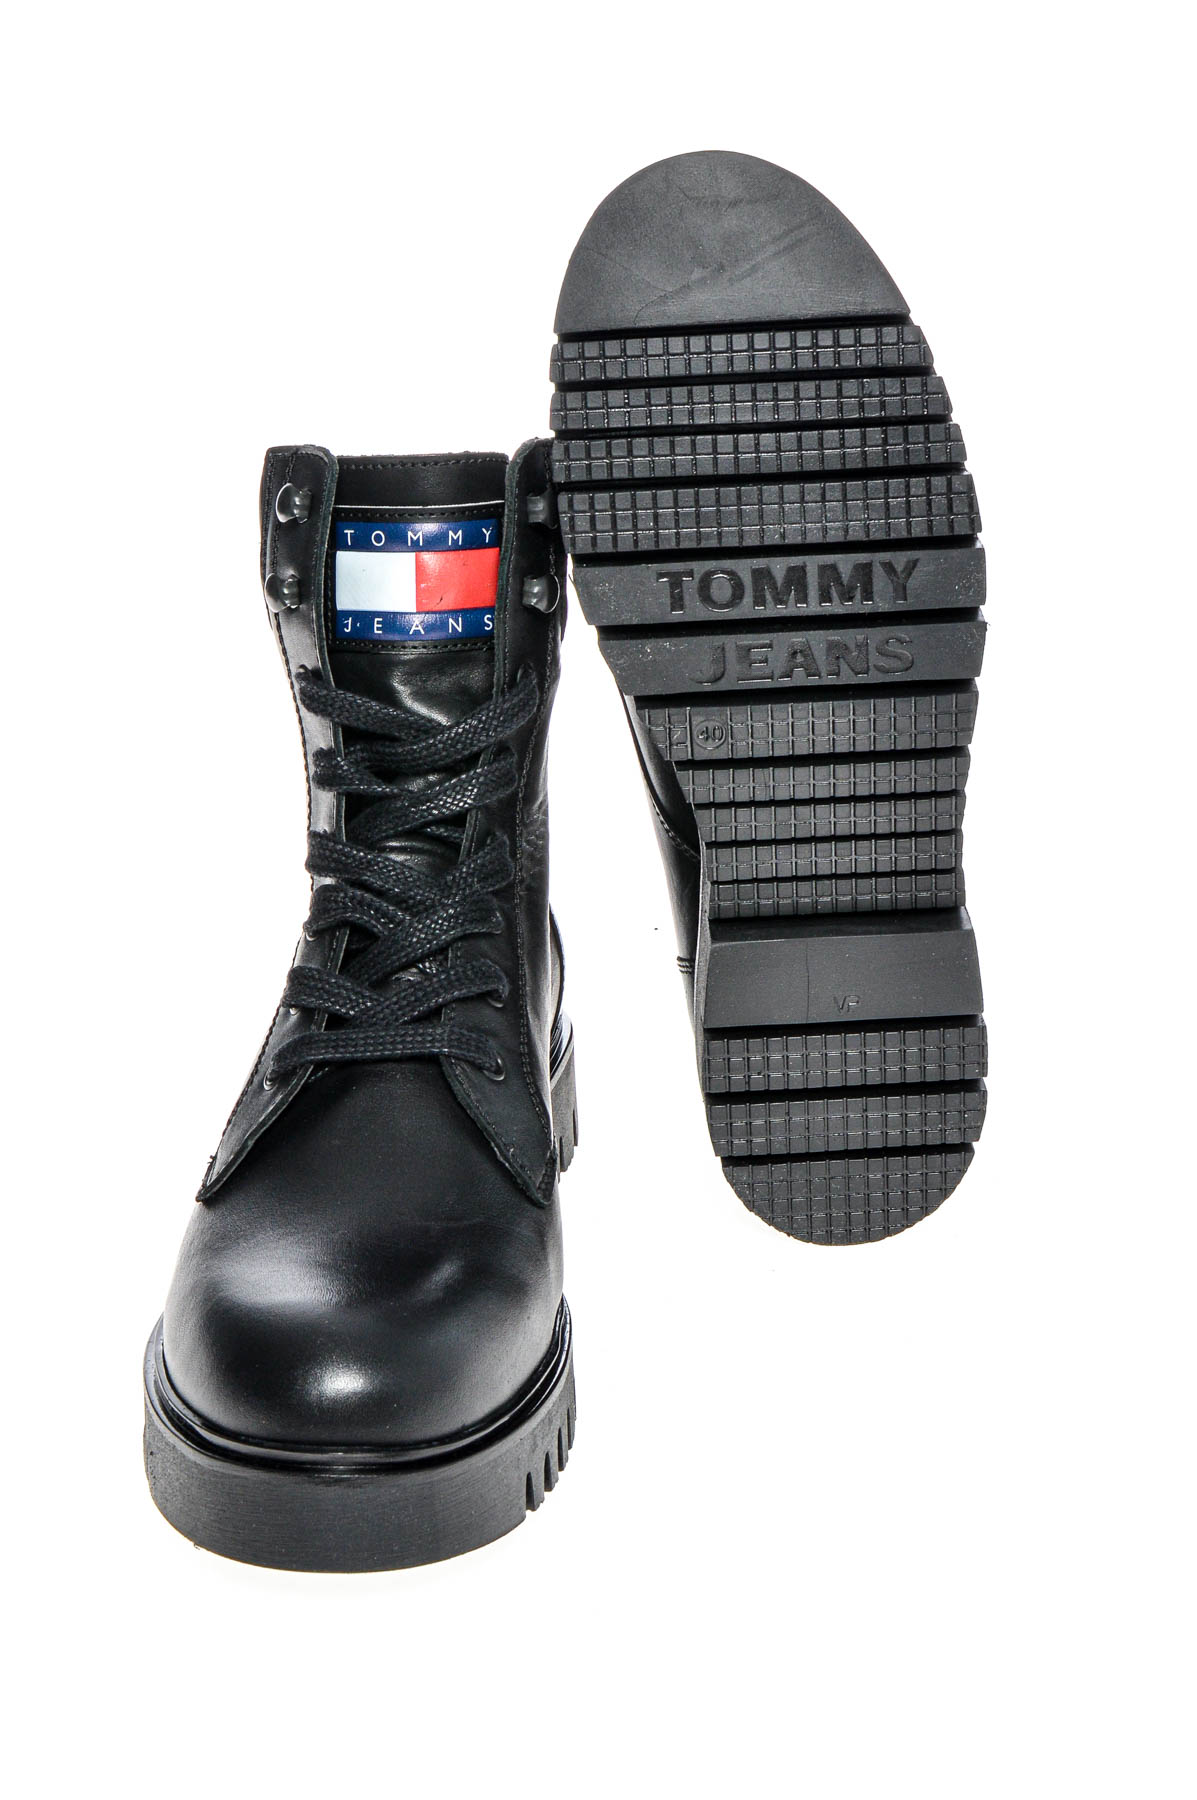 Women's boots - TOMMY JEANS - 3